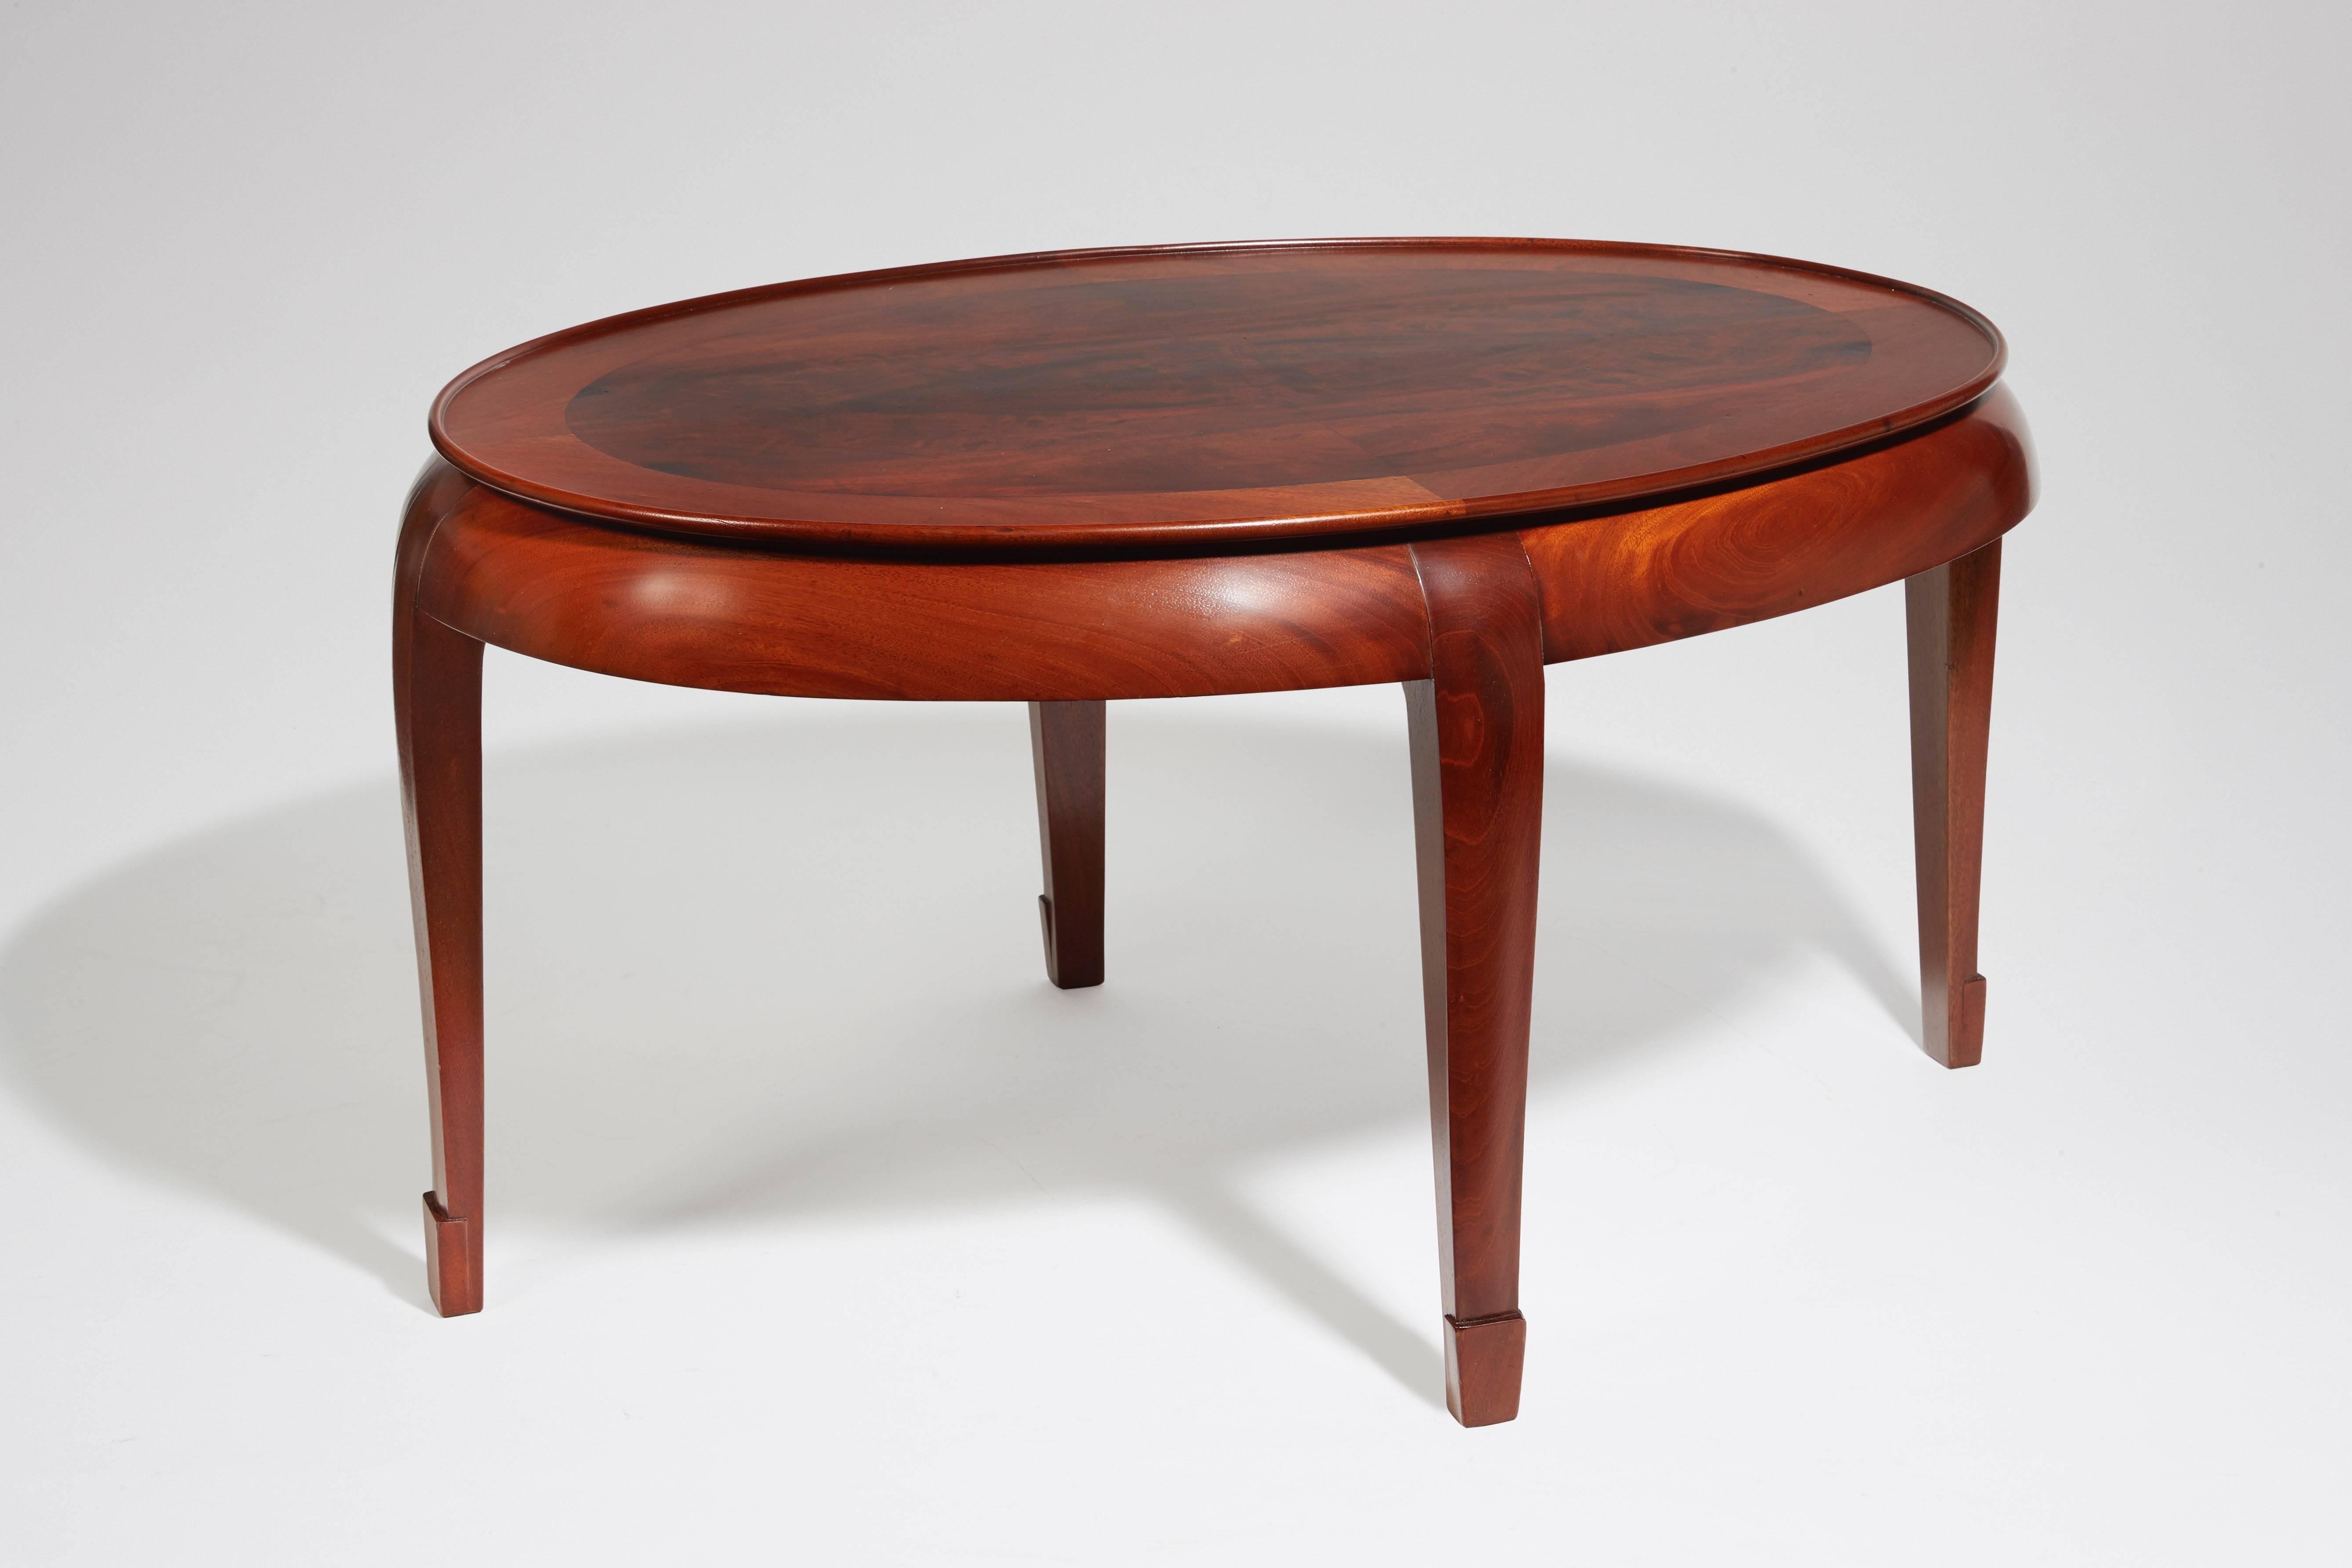 A Mahogany coffee table, oval shaped top. Stamped with the monogram stamp of the Compagnie des Arts Français.